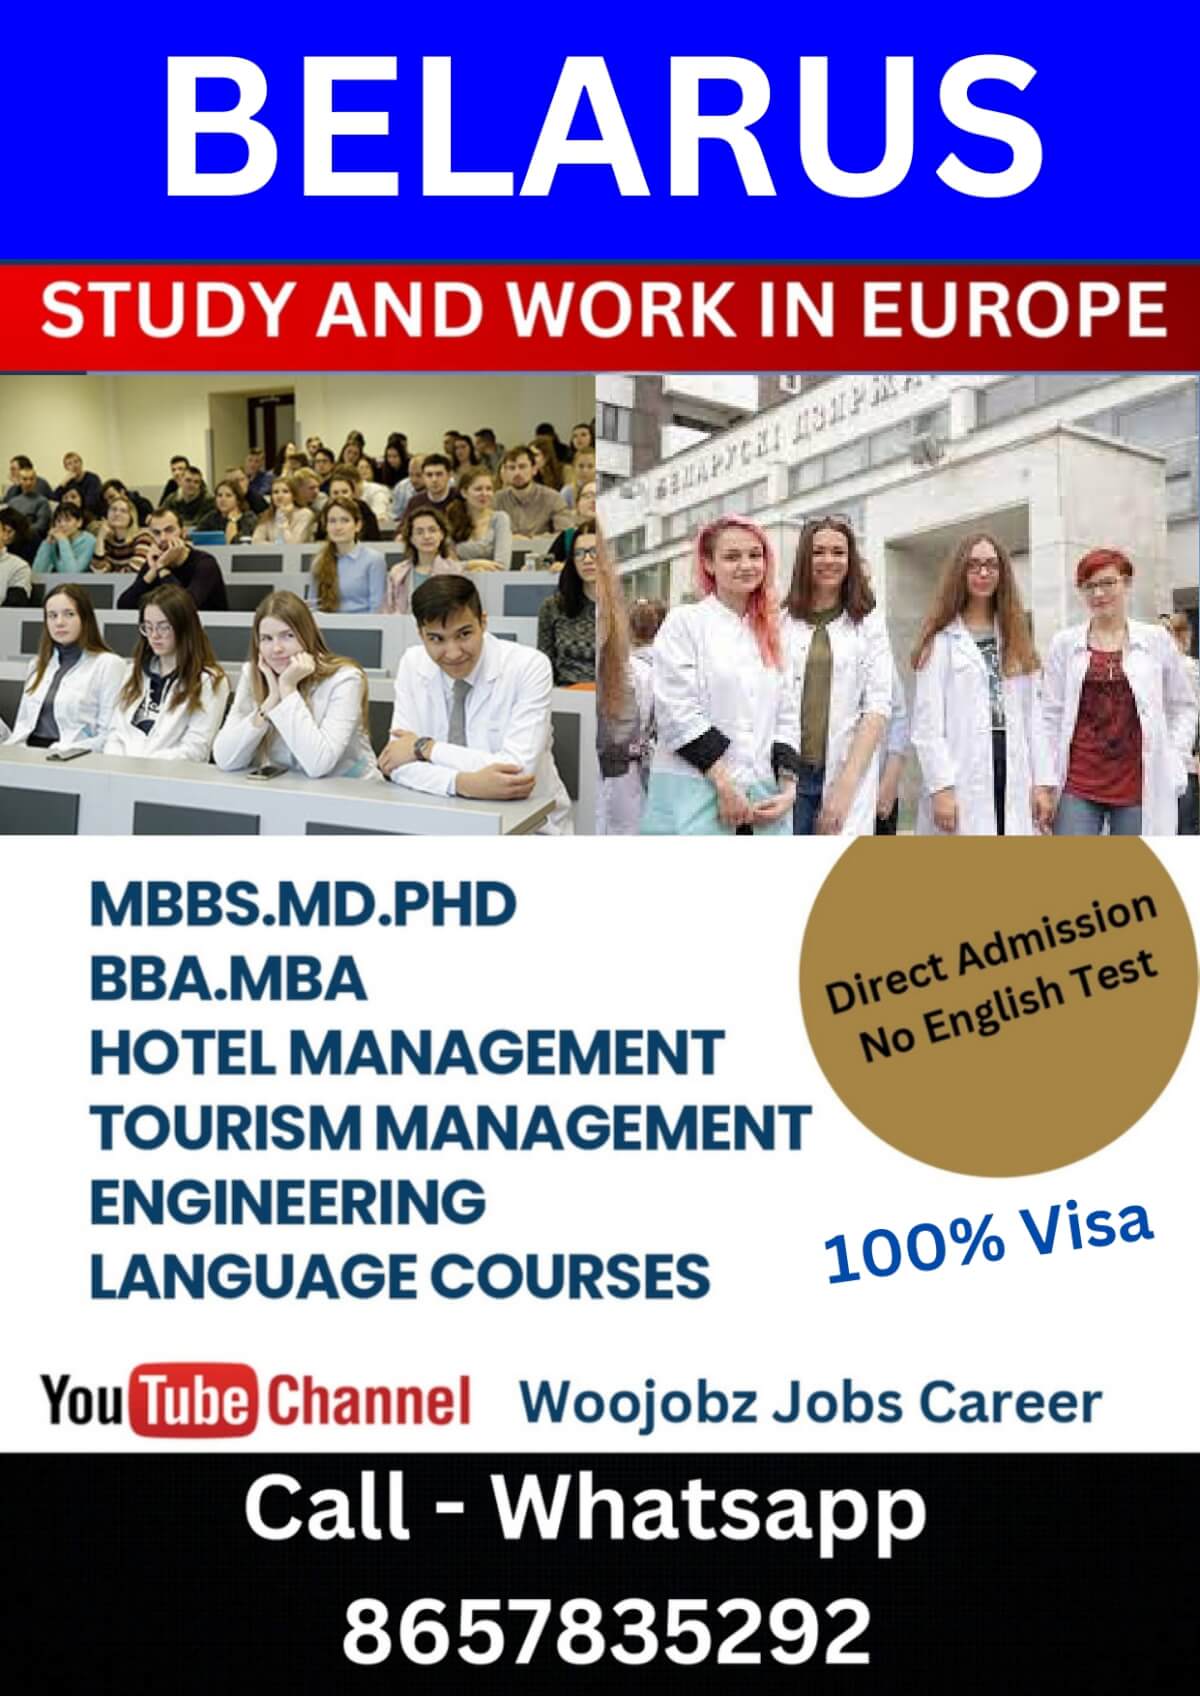 Belarus -  Study, Work and Immigration to Europe